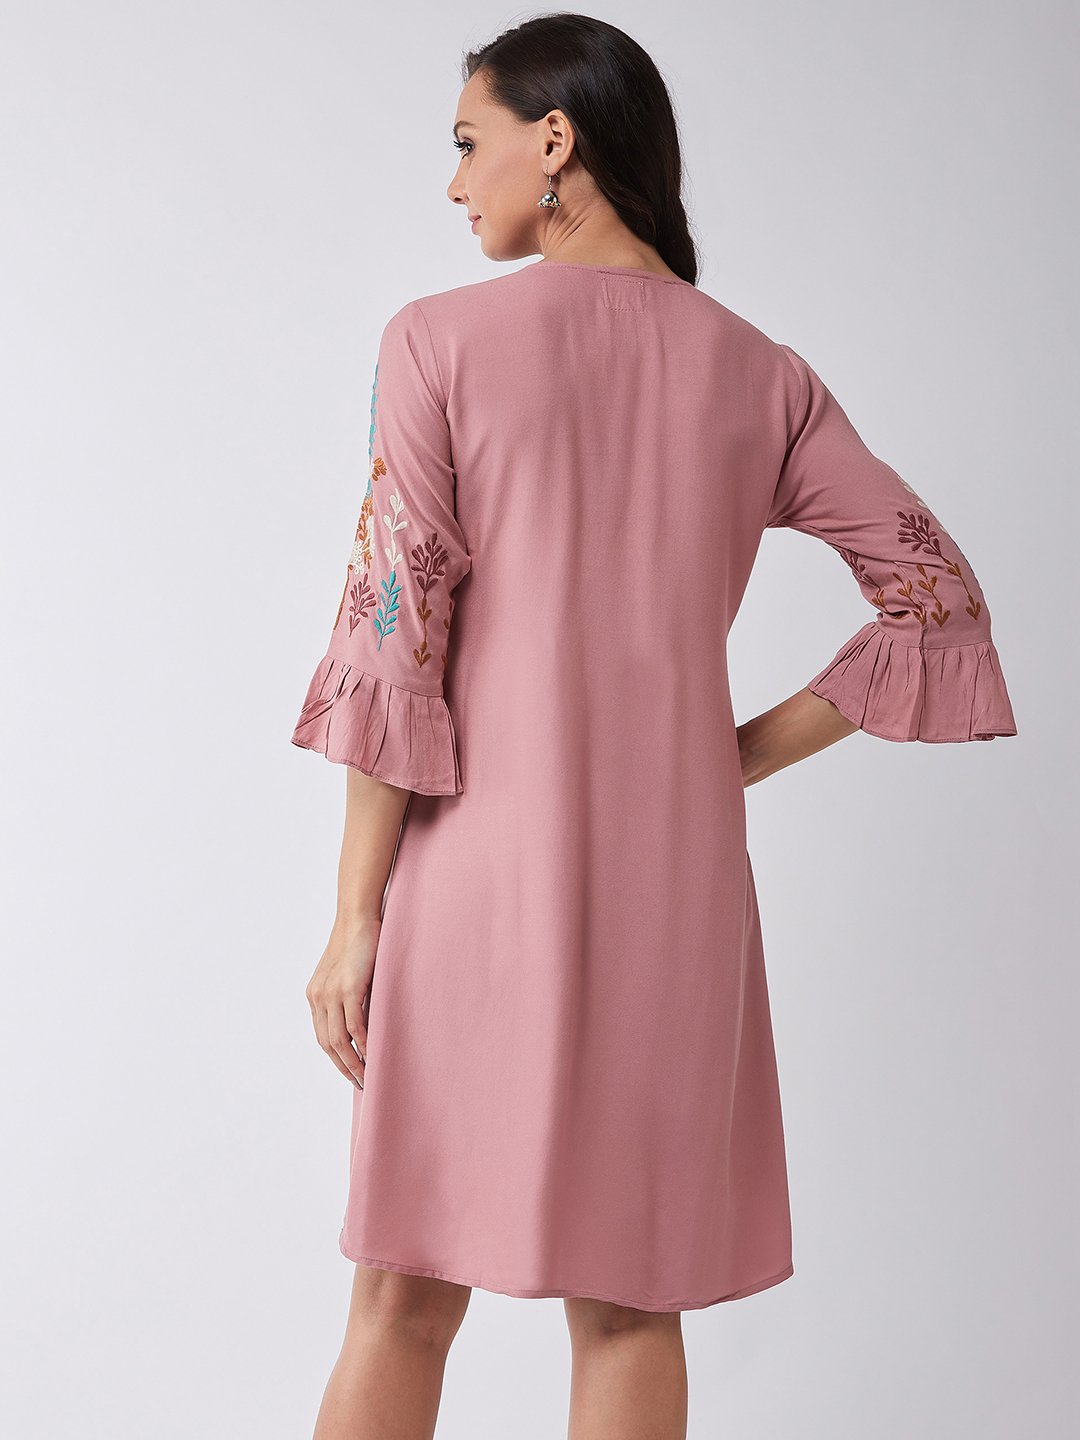 Ever Peach Embroidered Dress